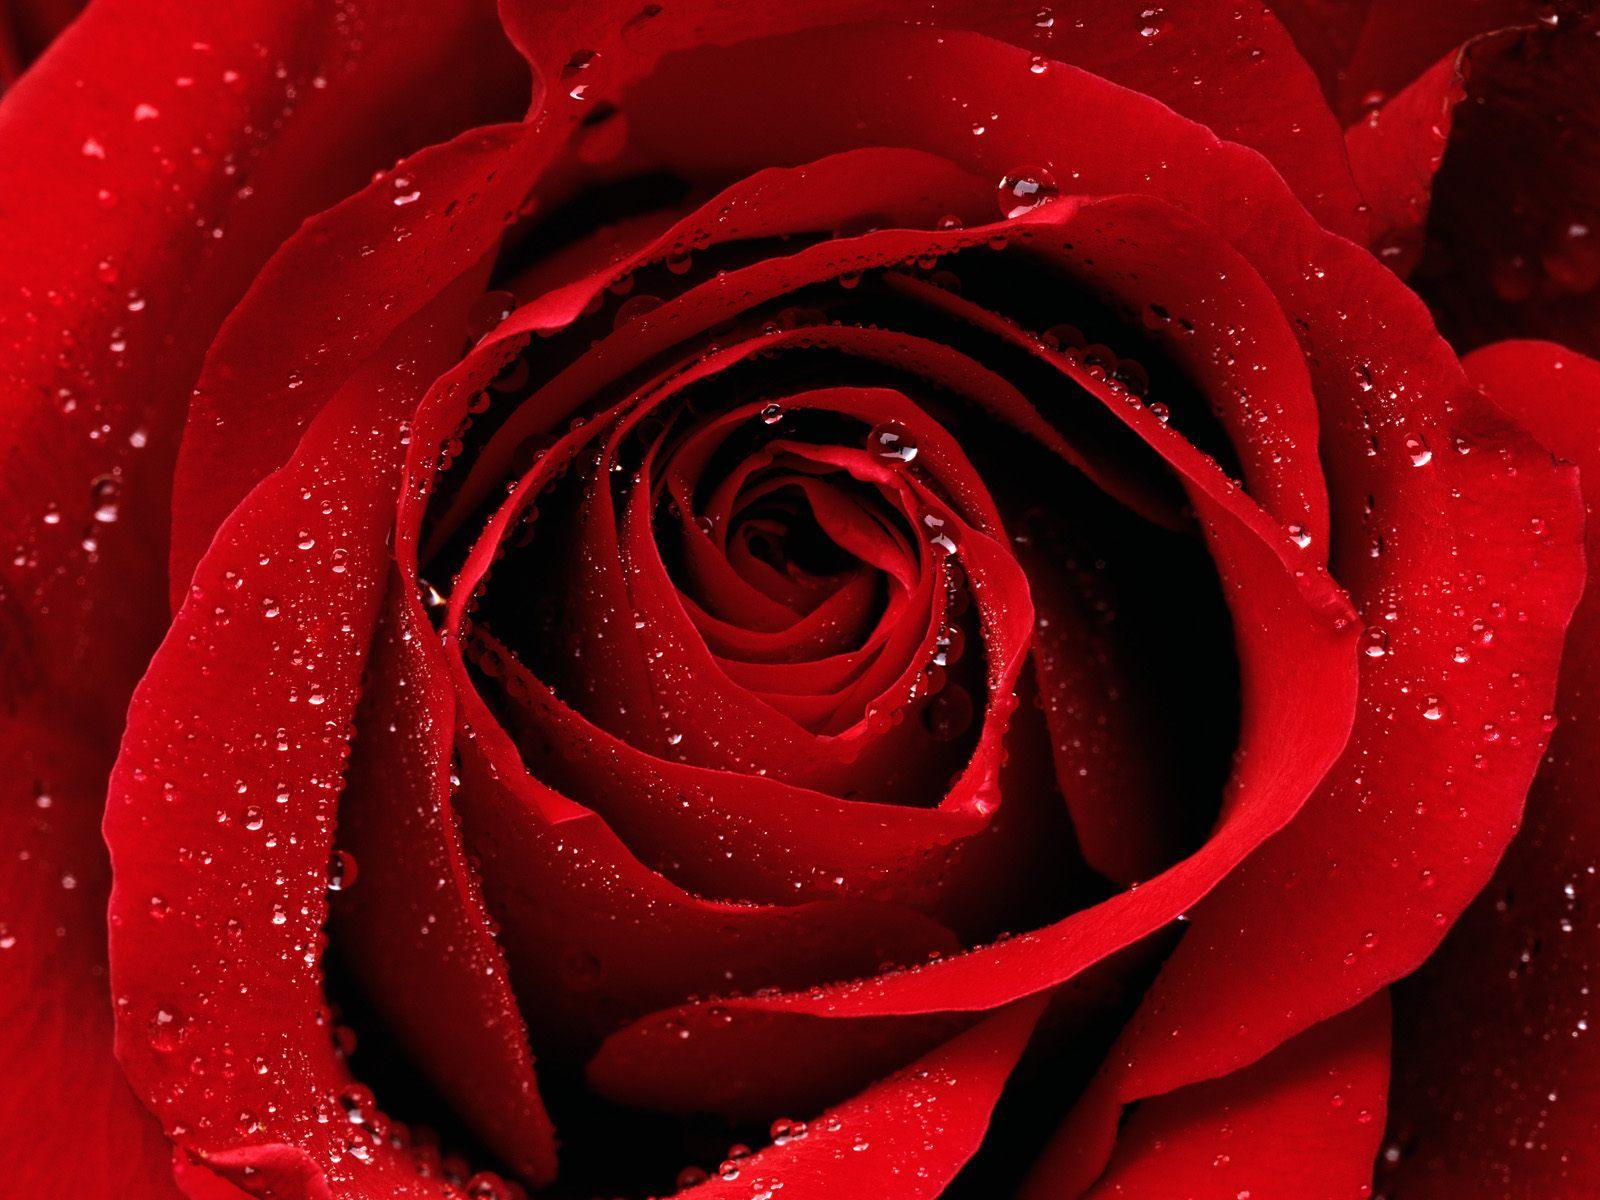 Download 720x1280 wallpaper Rose fresh red flowers Samsung Galaxy mini  S3 S5 Neo Alpha So  Red flower wallpaper Red roses wallpaper Rose  flower wallpaper